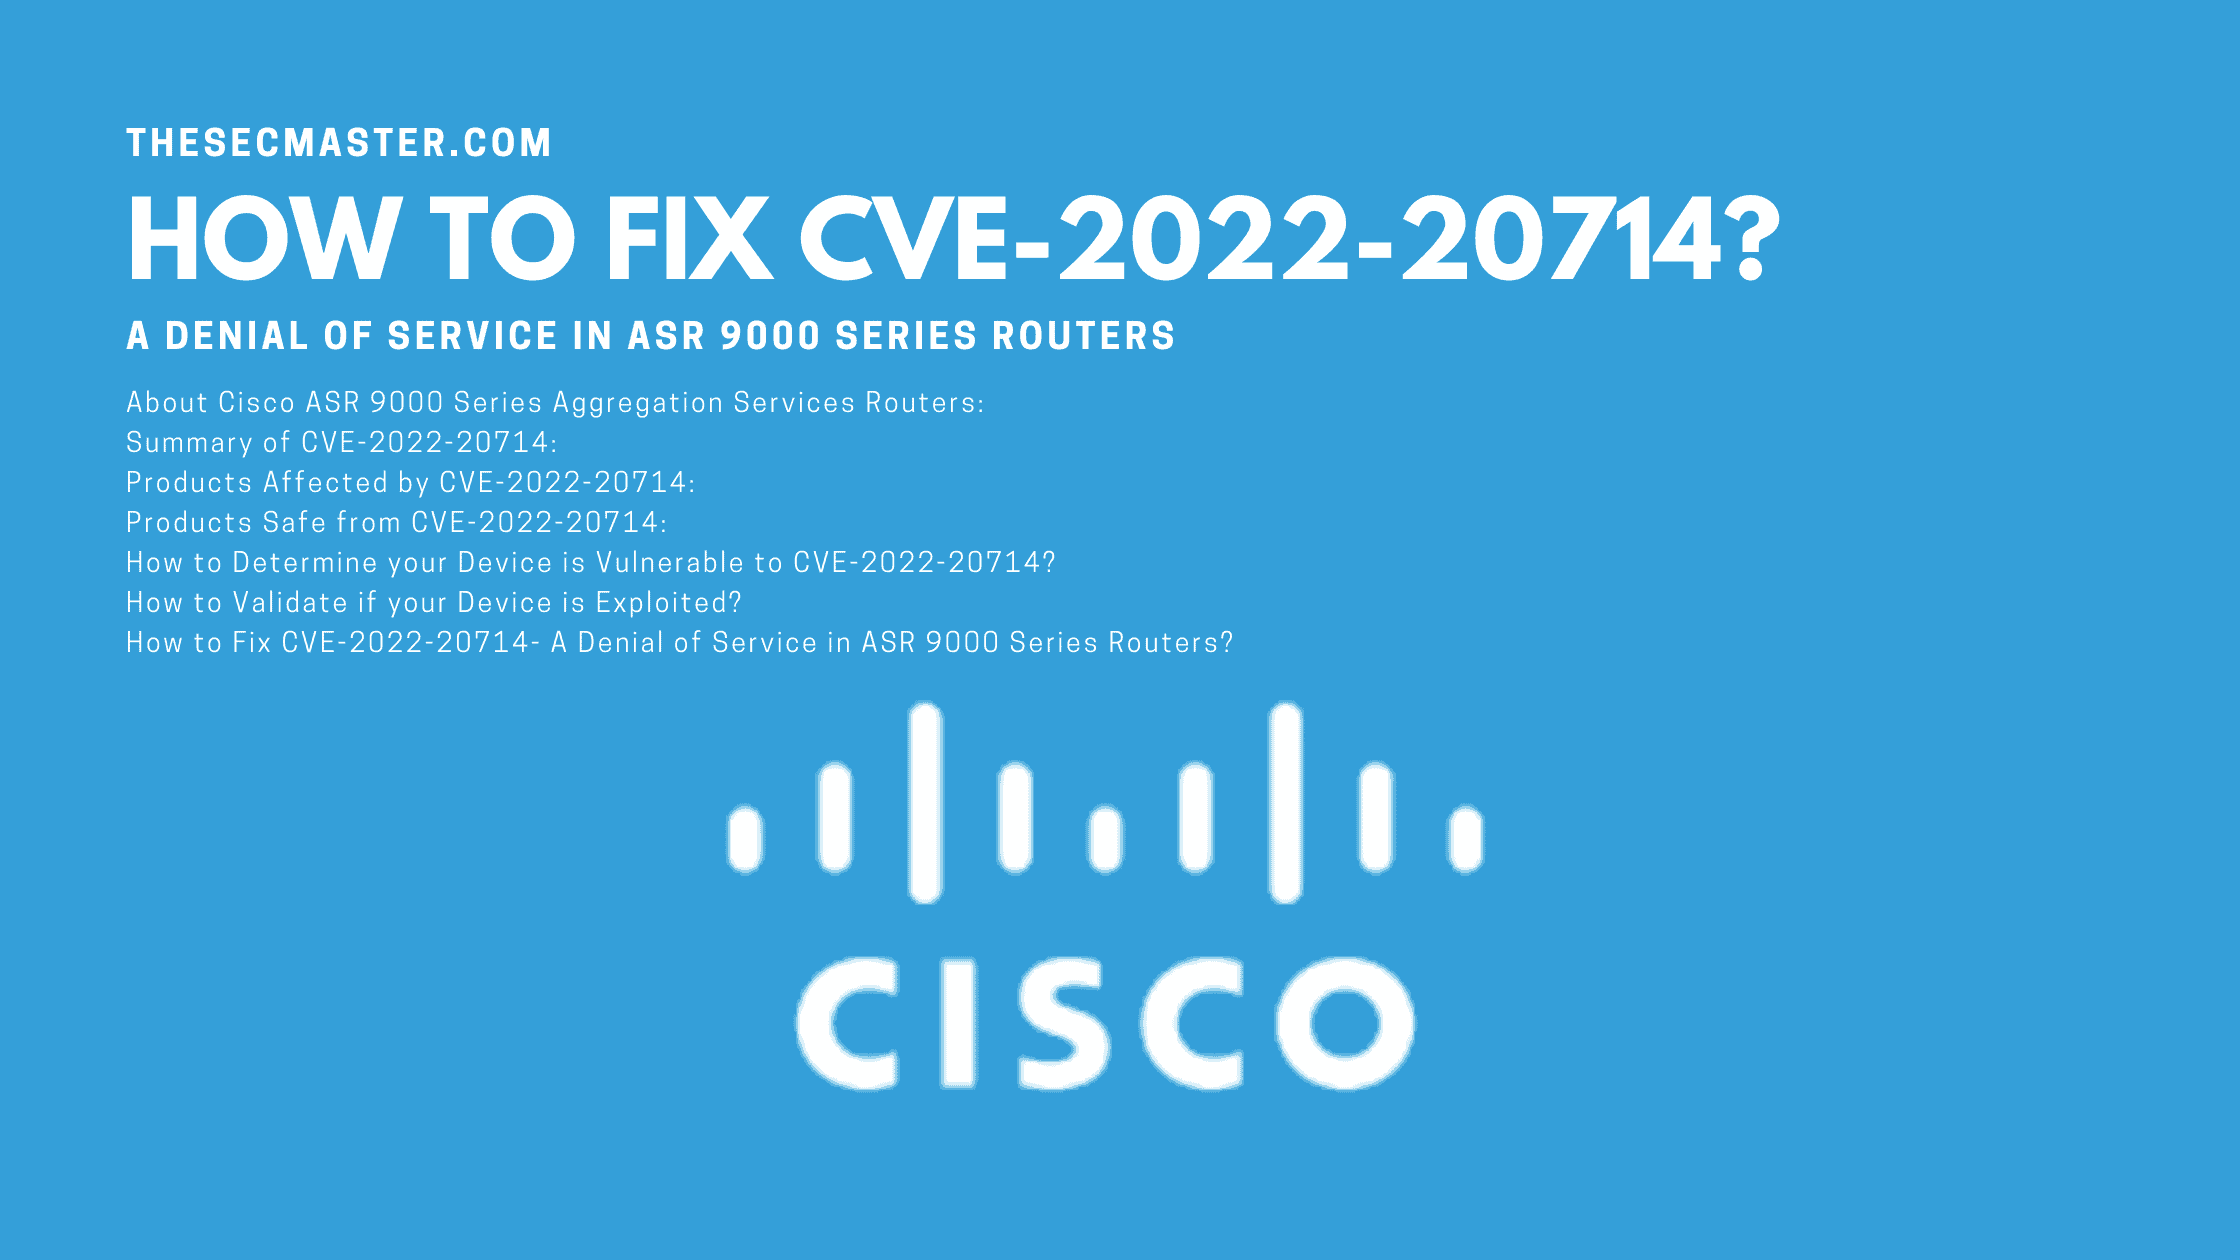 How To Fix Cve 2022 20714 A Denial Of Service In Asr 9000 Series Routers